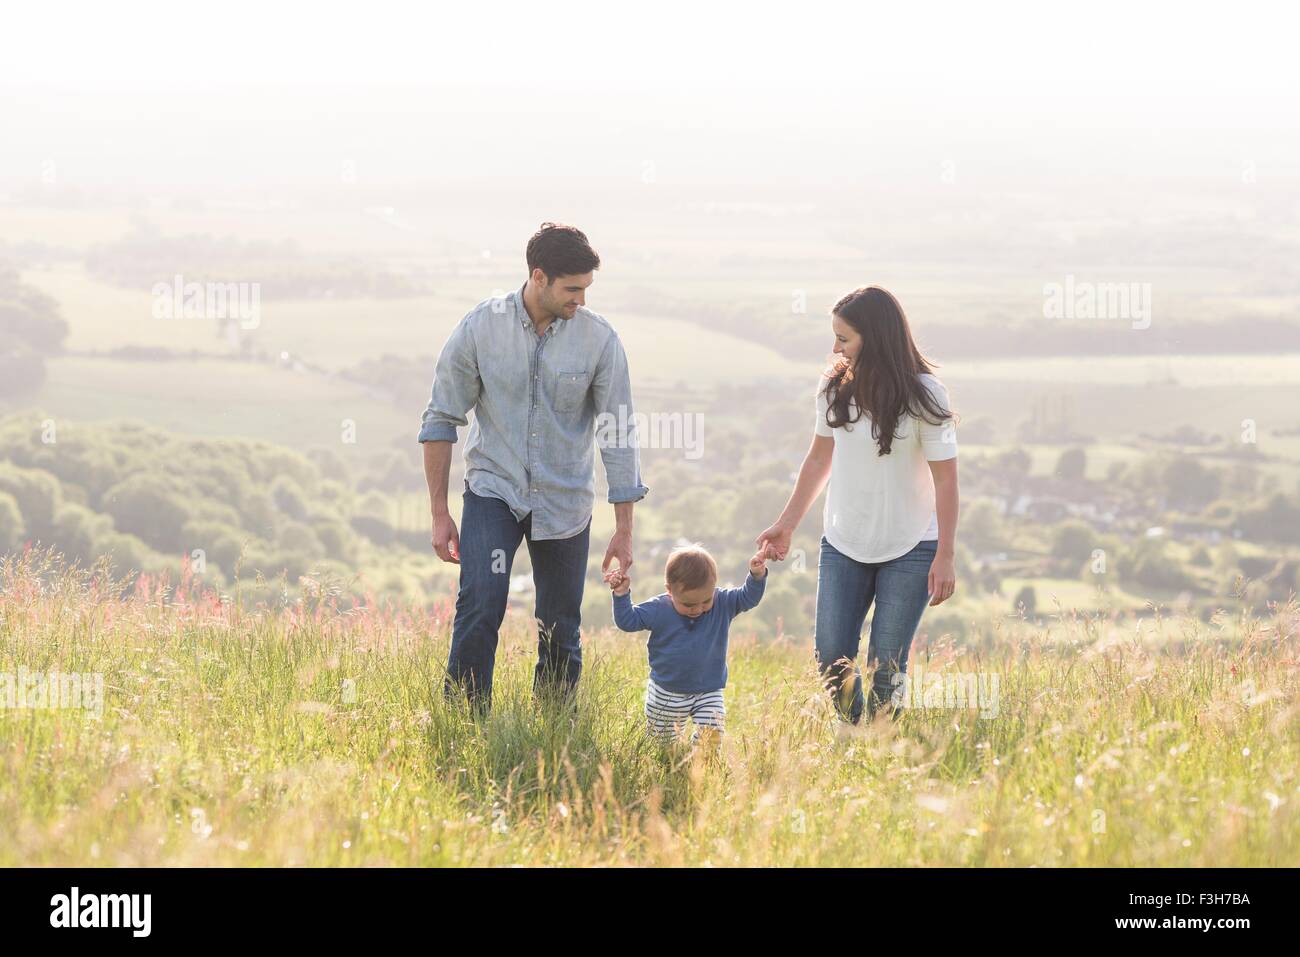 Young family walking in field, hand in hand Stock Photo